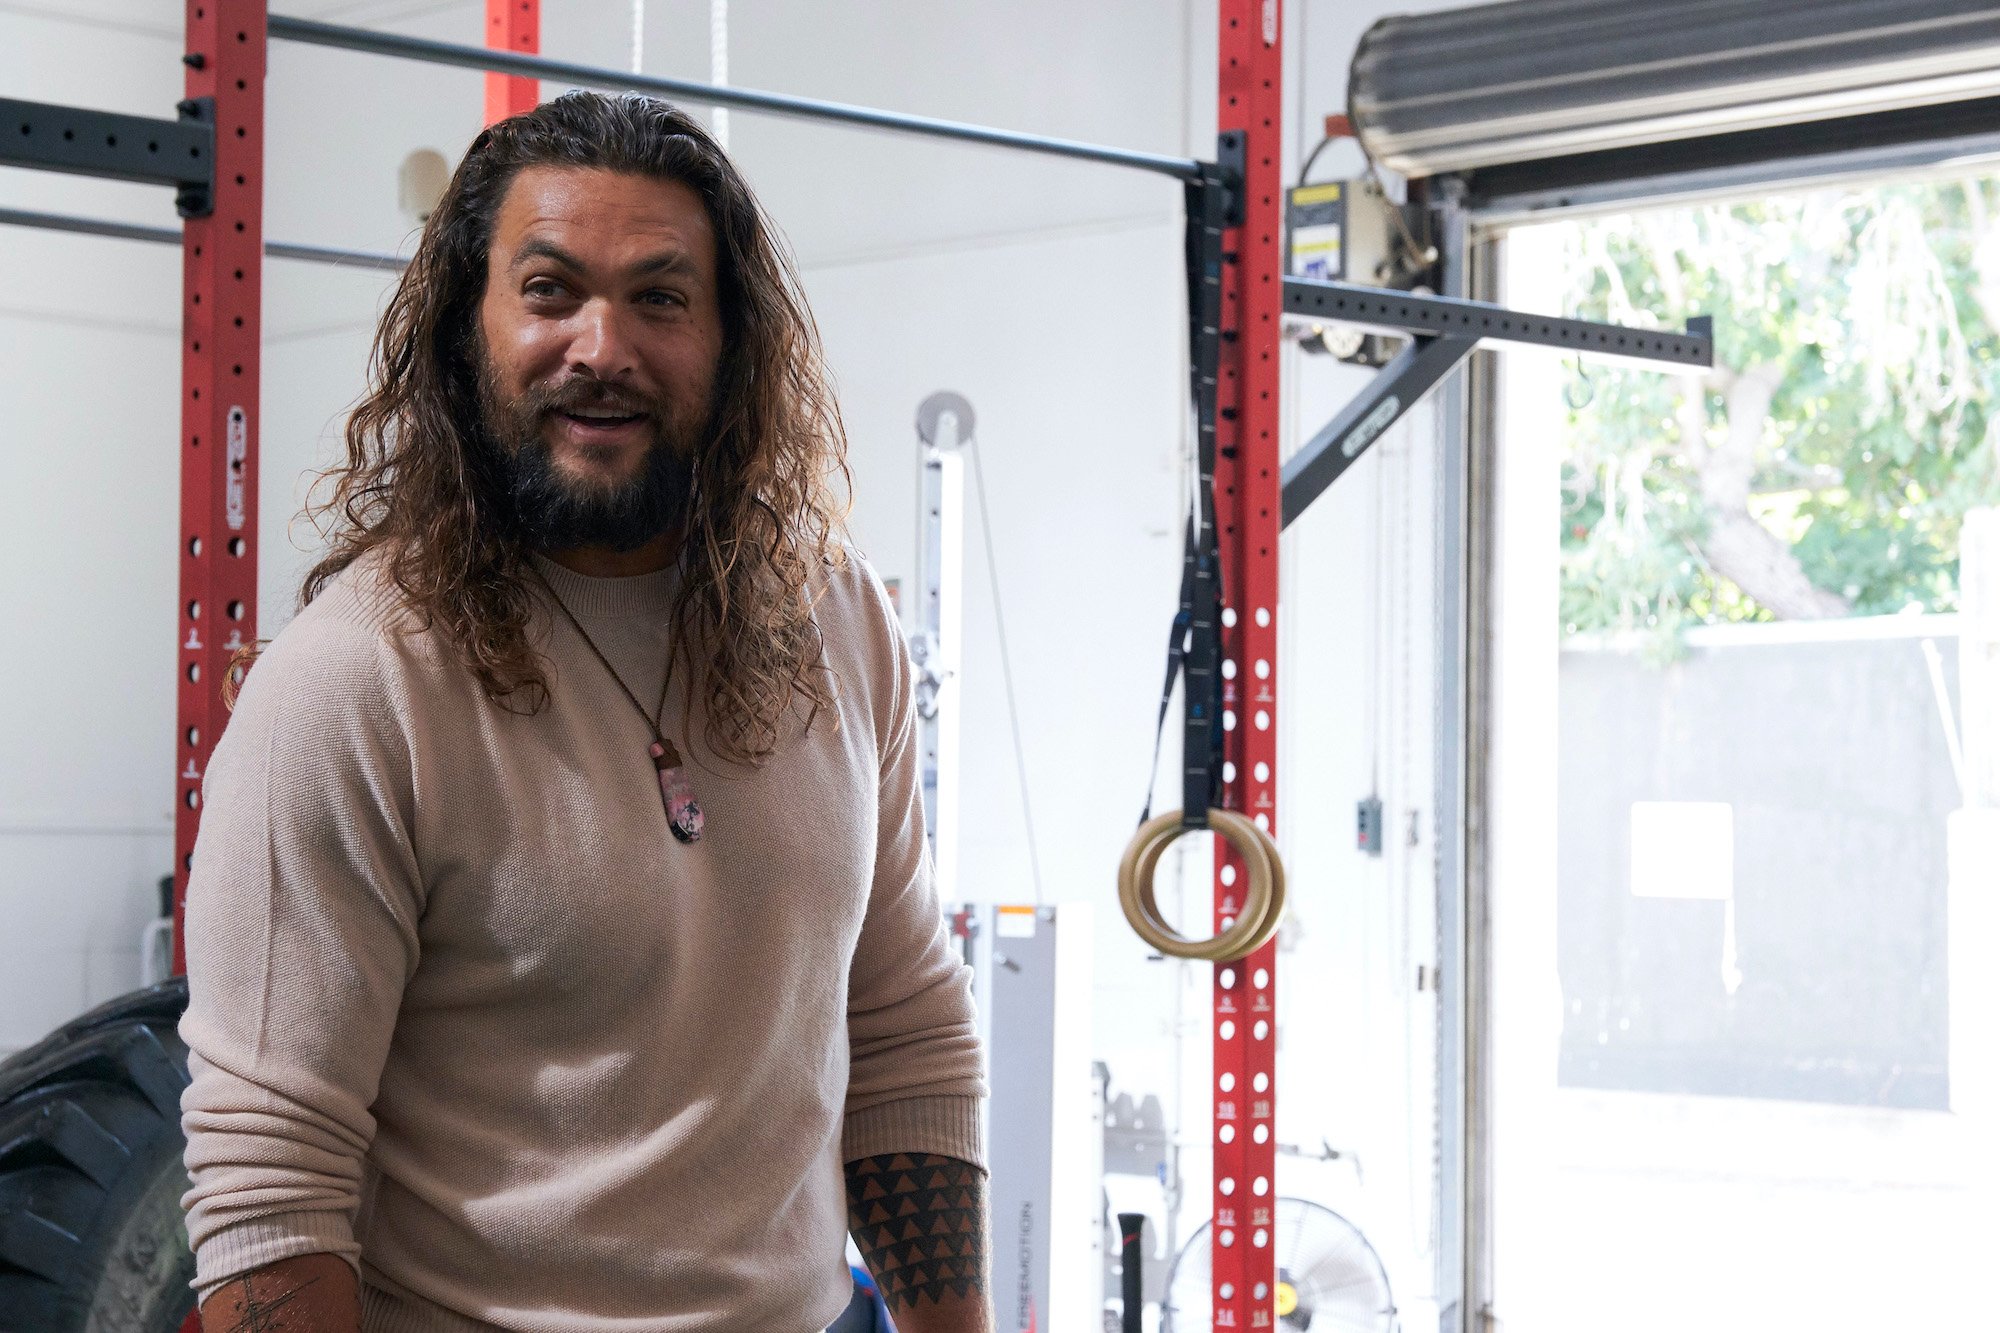 Jason Momoa smiling in front of exercise equipment